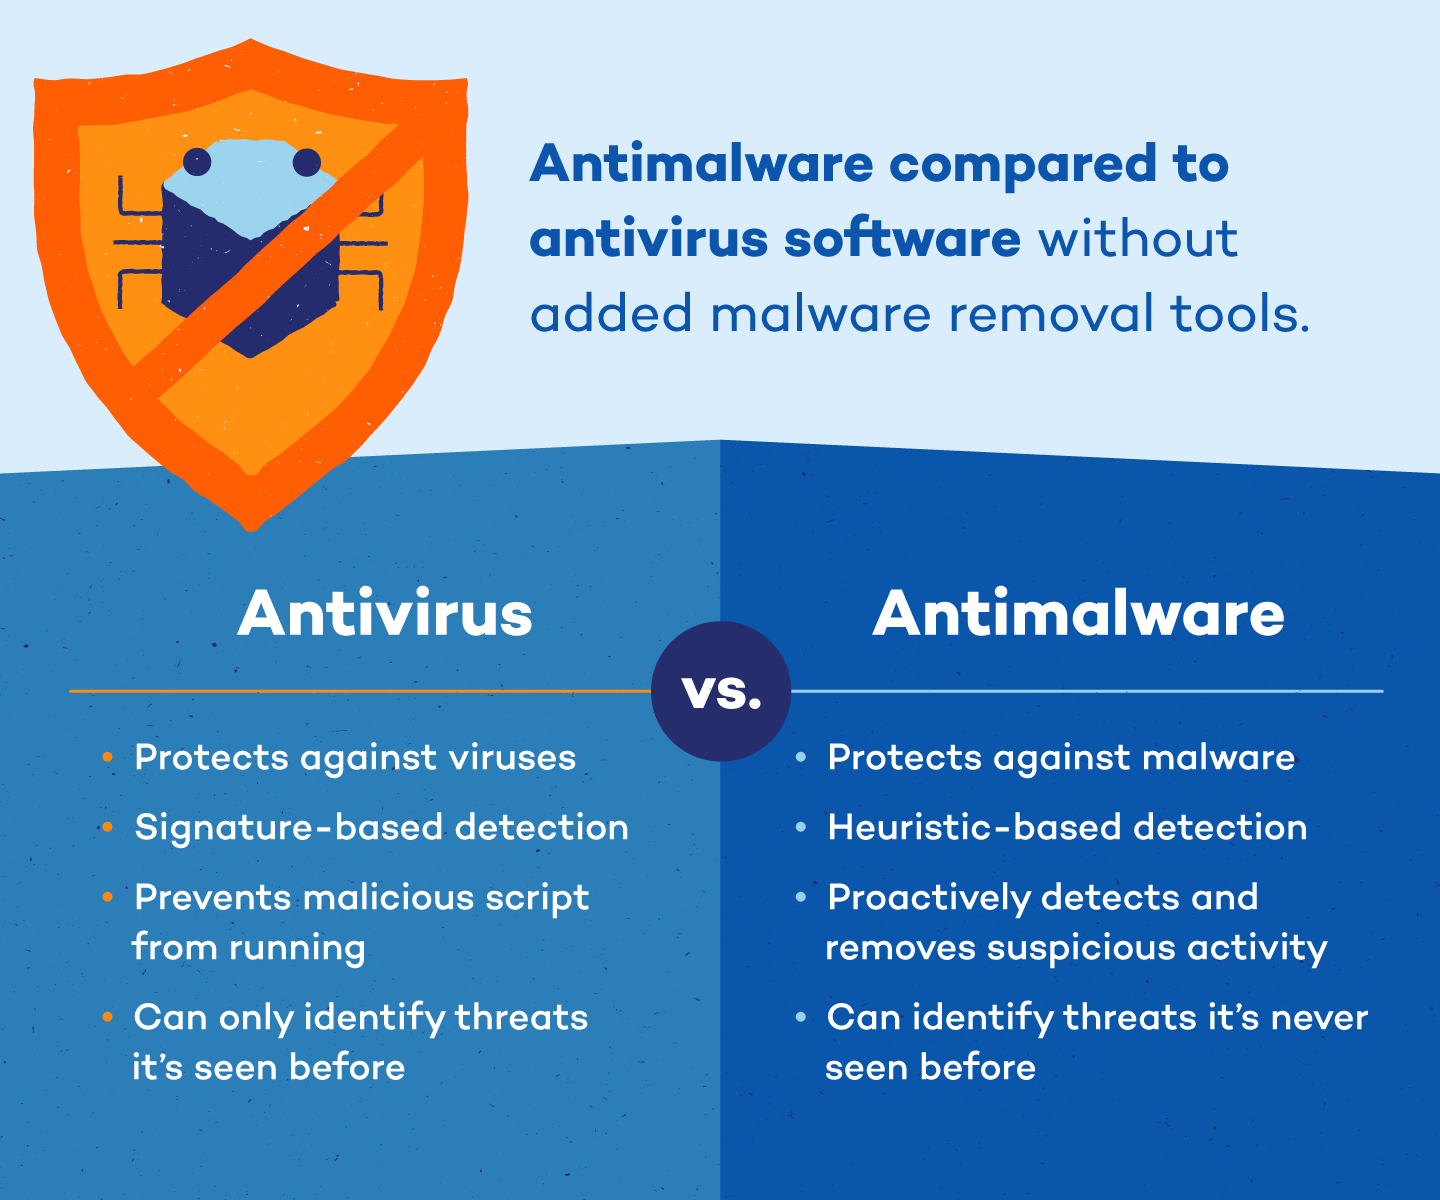 Run a reputable antivirus or anti-malware software to scan the system for any malicious programs that may be interfering with becomreg.exe.
Remove any detected malware and quarantine or delete them accordingly.